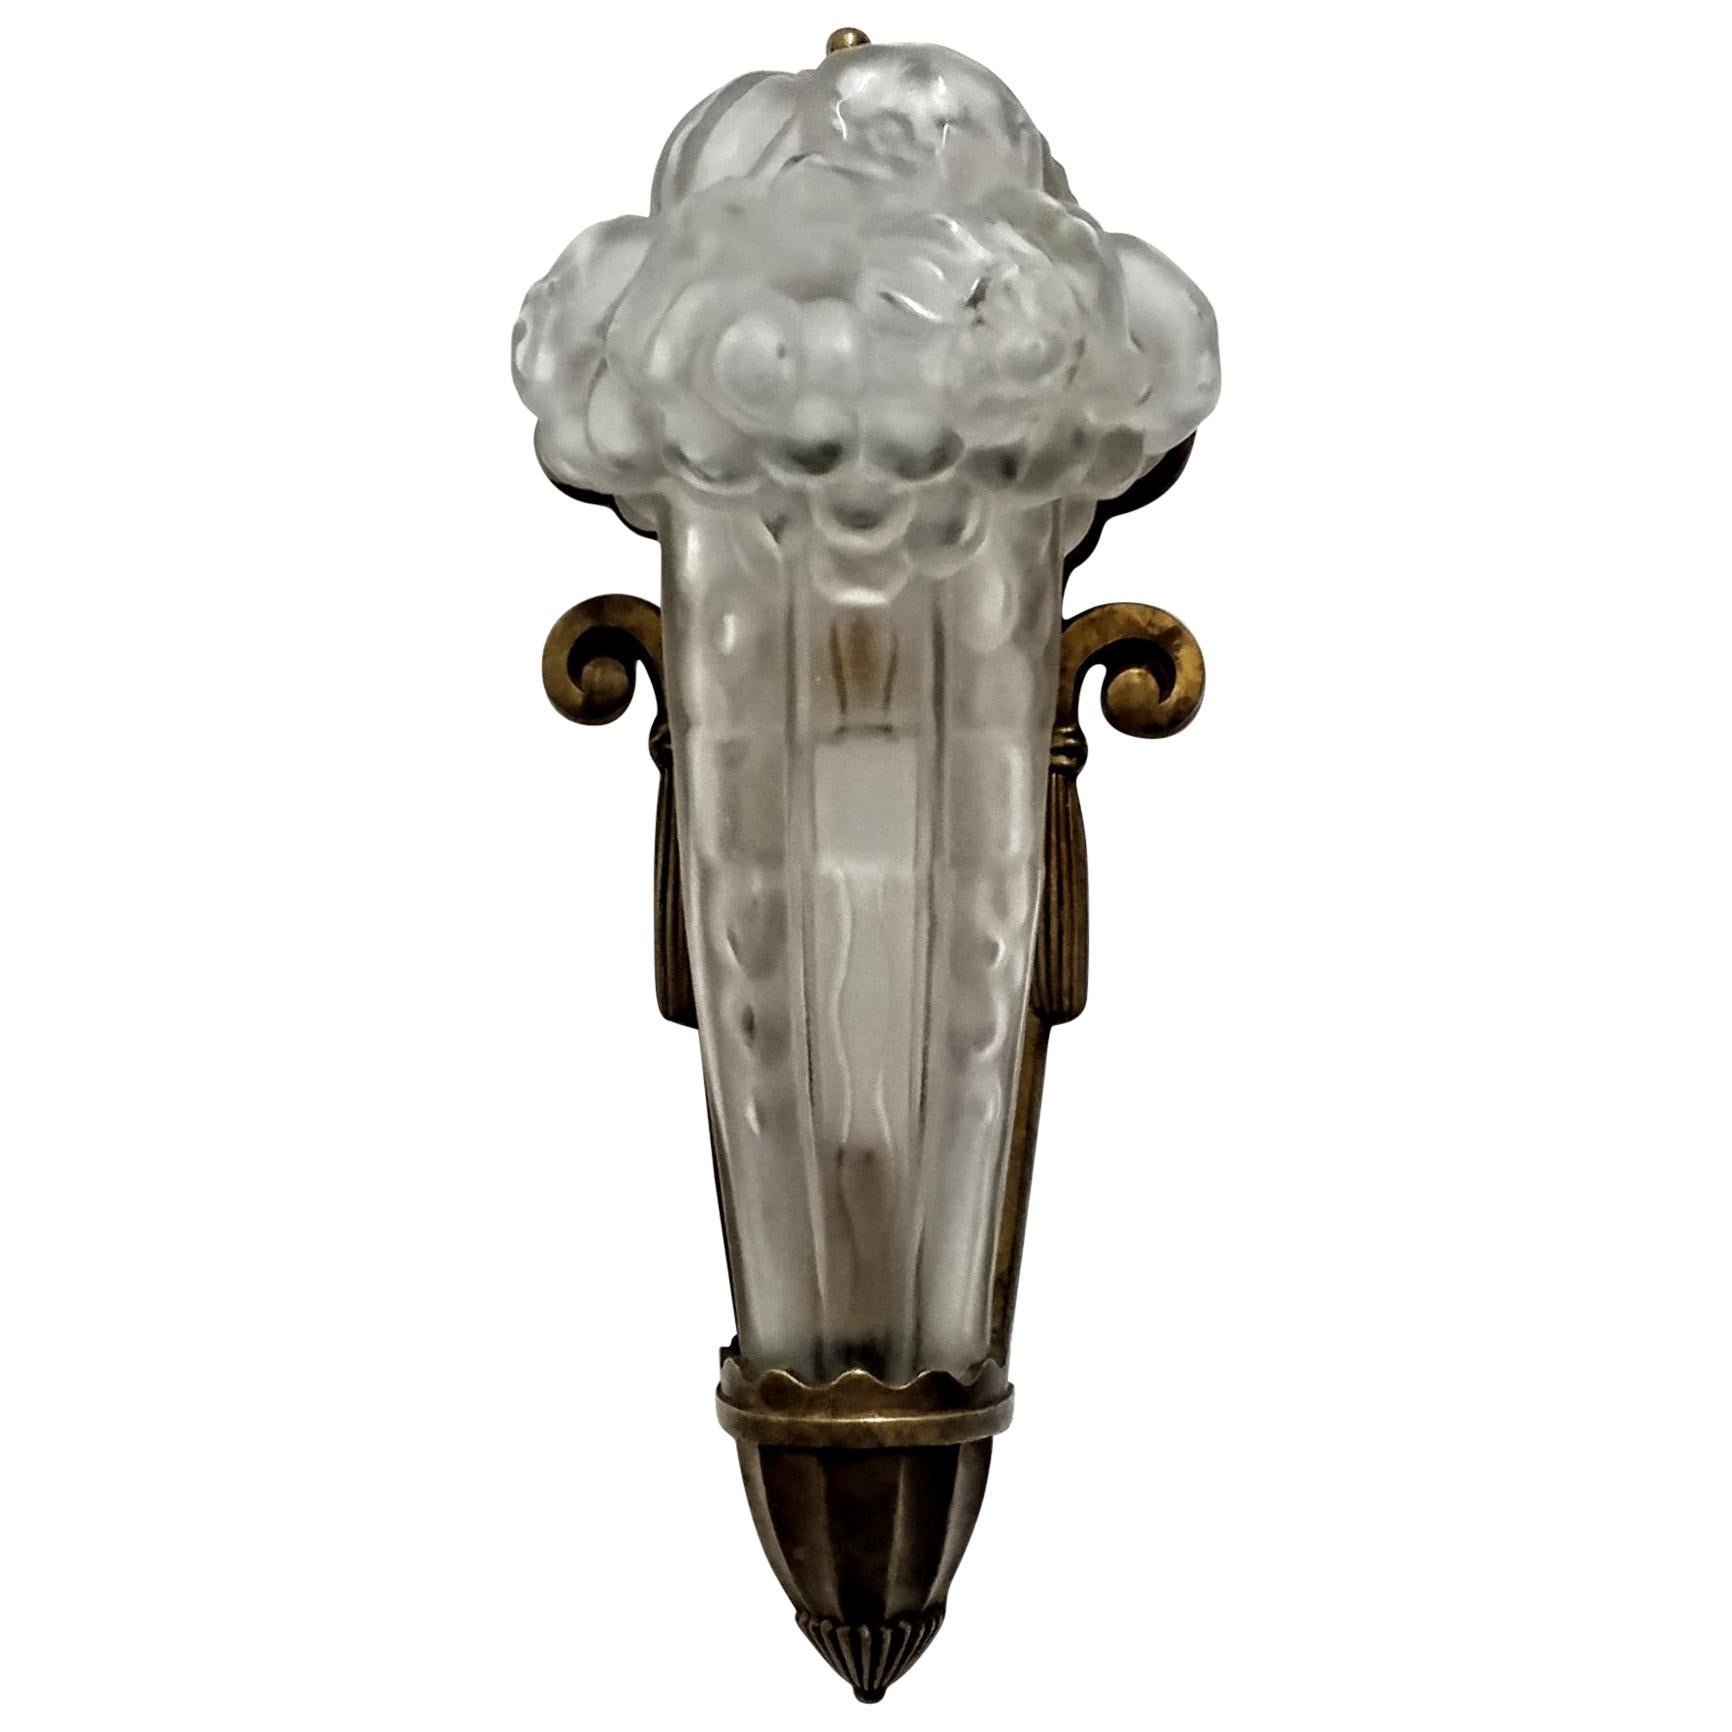 A Single French Art Deco Wall Sconce by Genet et Michon 